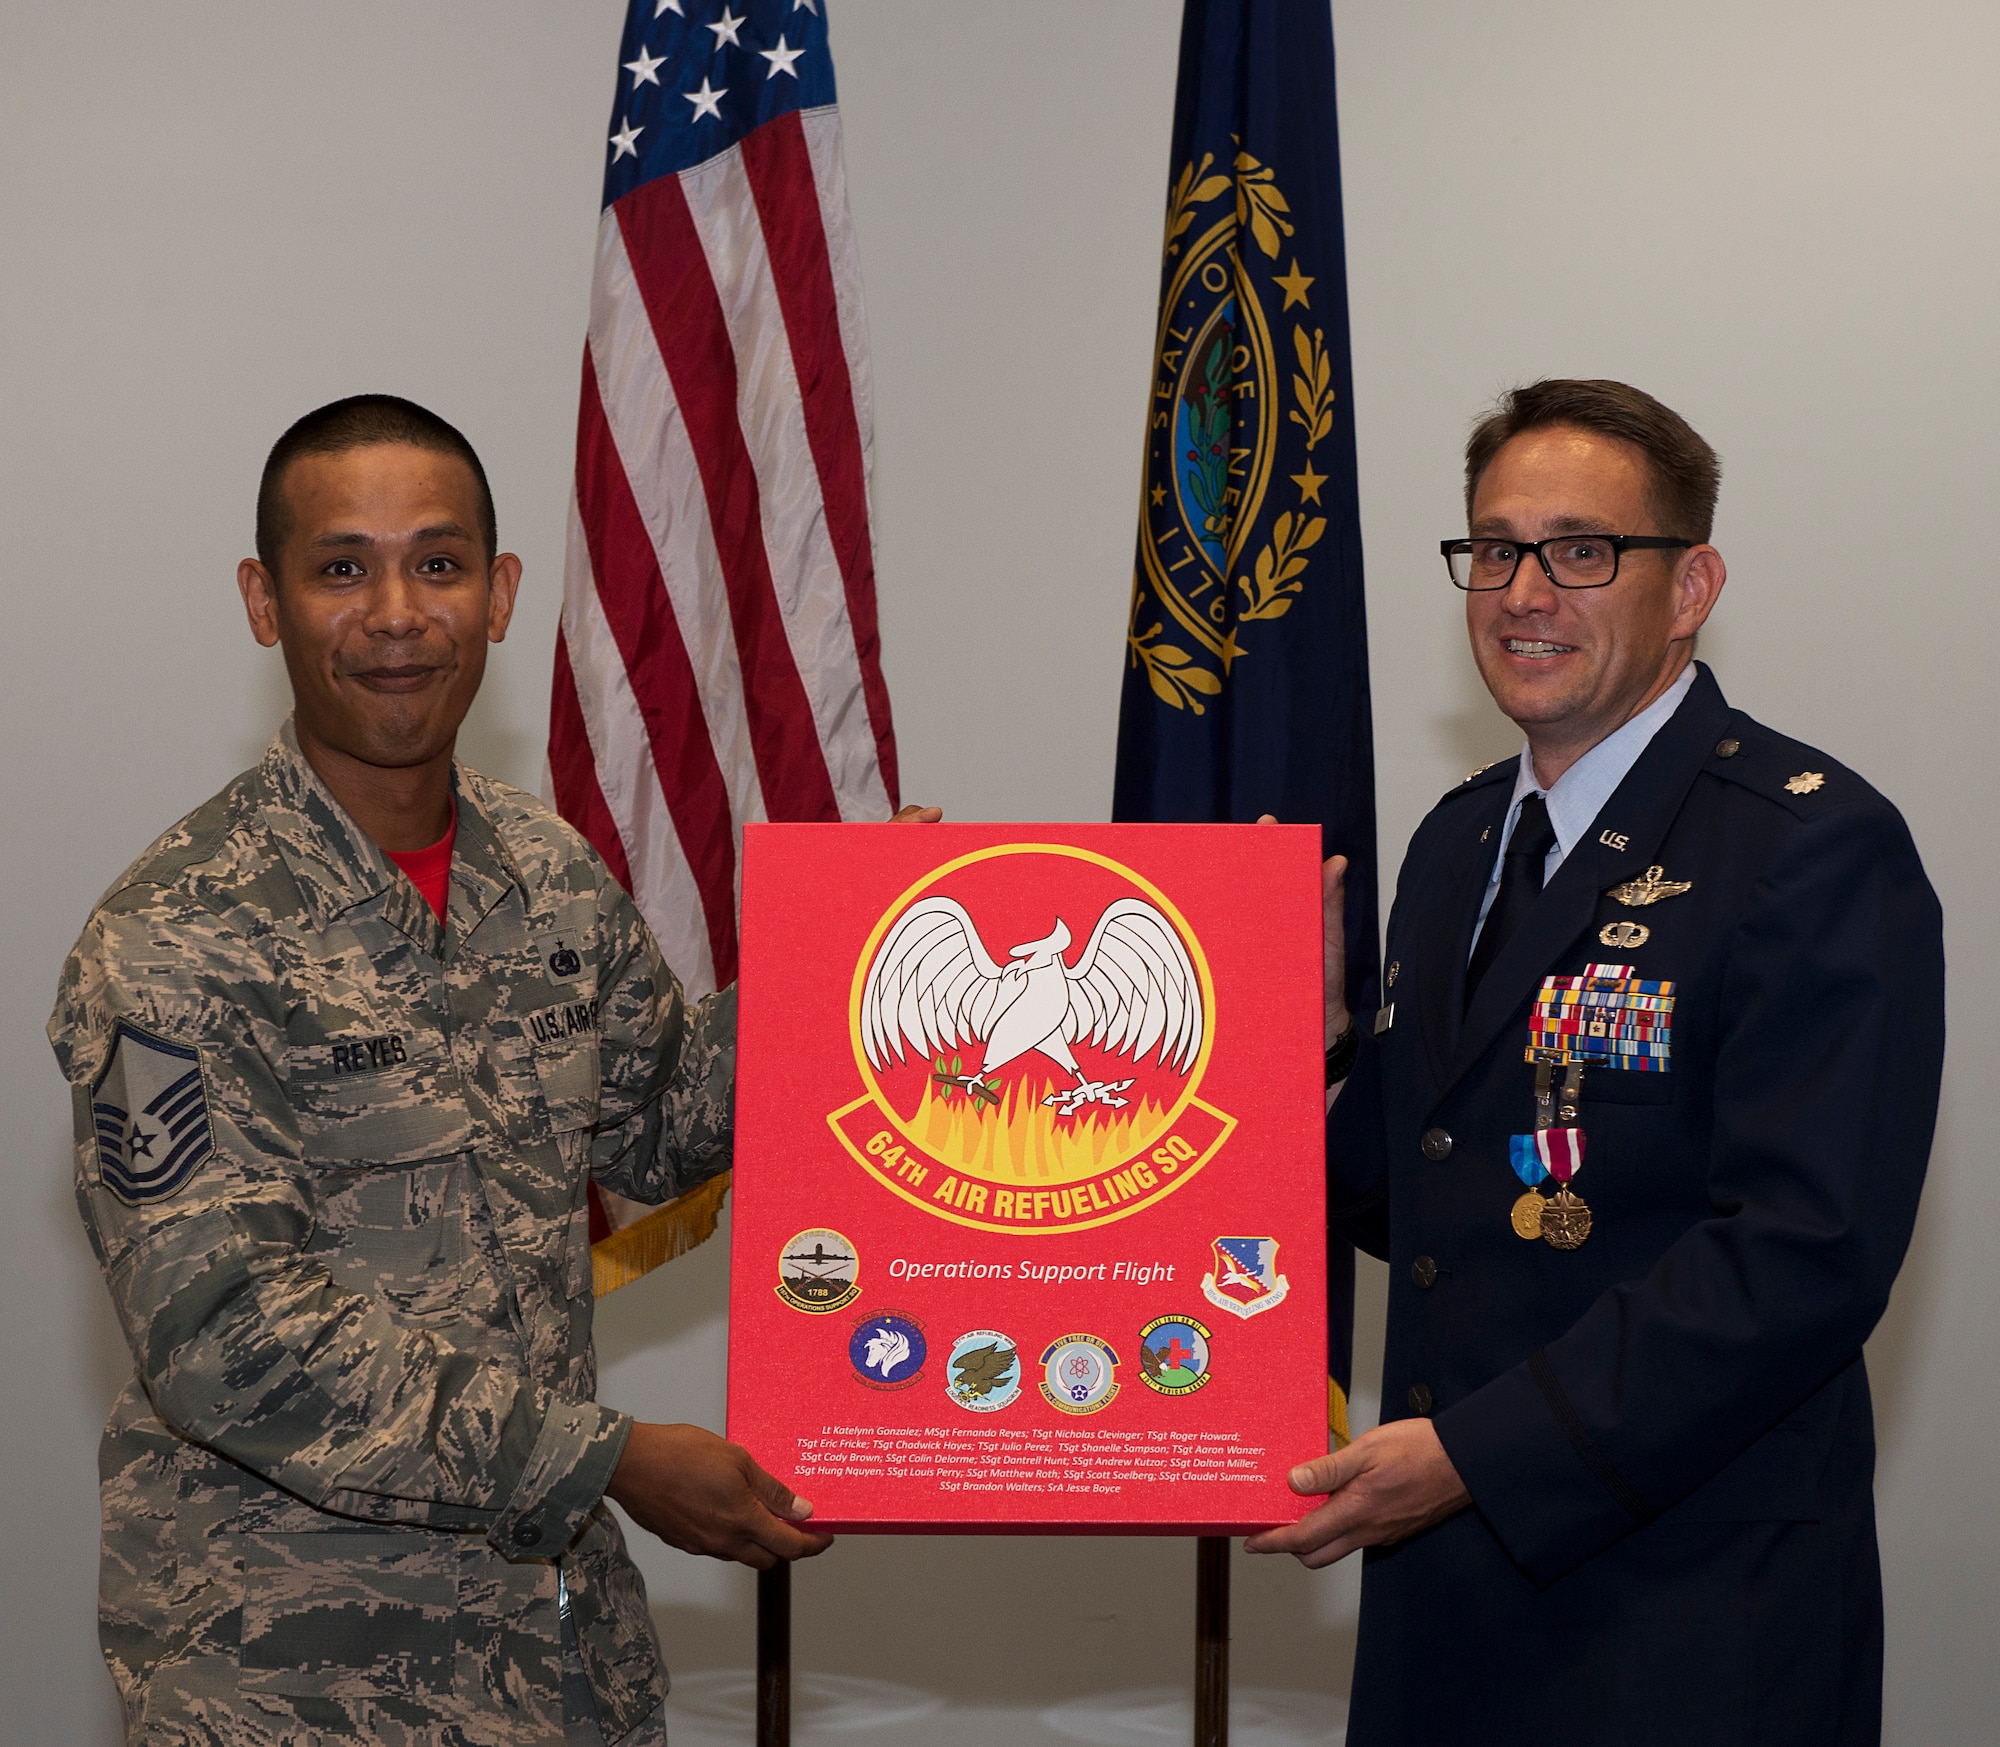 Lt. Col. Joshua J. Zaker, commander of the 64th Air Refueling Squadron, receives a gift from Master Sgt. Fernando B. Reyes, superintendent of the 64th Operations Support Flight, during a ceremony on July 6, 2018 at Pease Air National Guard Base, N.H. Zaker relinquished command of the 64th ARS after more than three years as the commander. (N.H. Air National Guard photo by Staff Sgt. Kayla White)